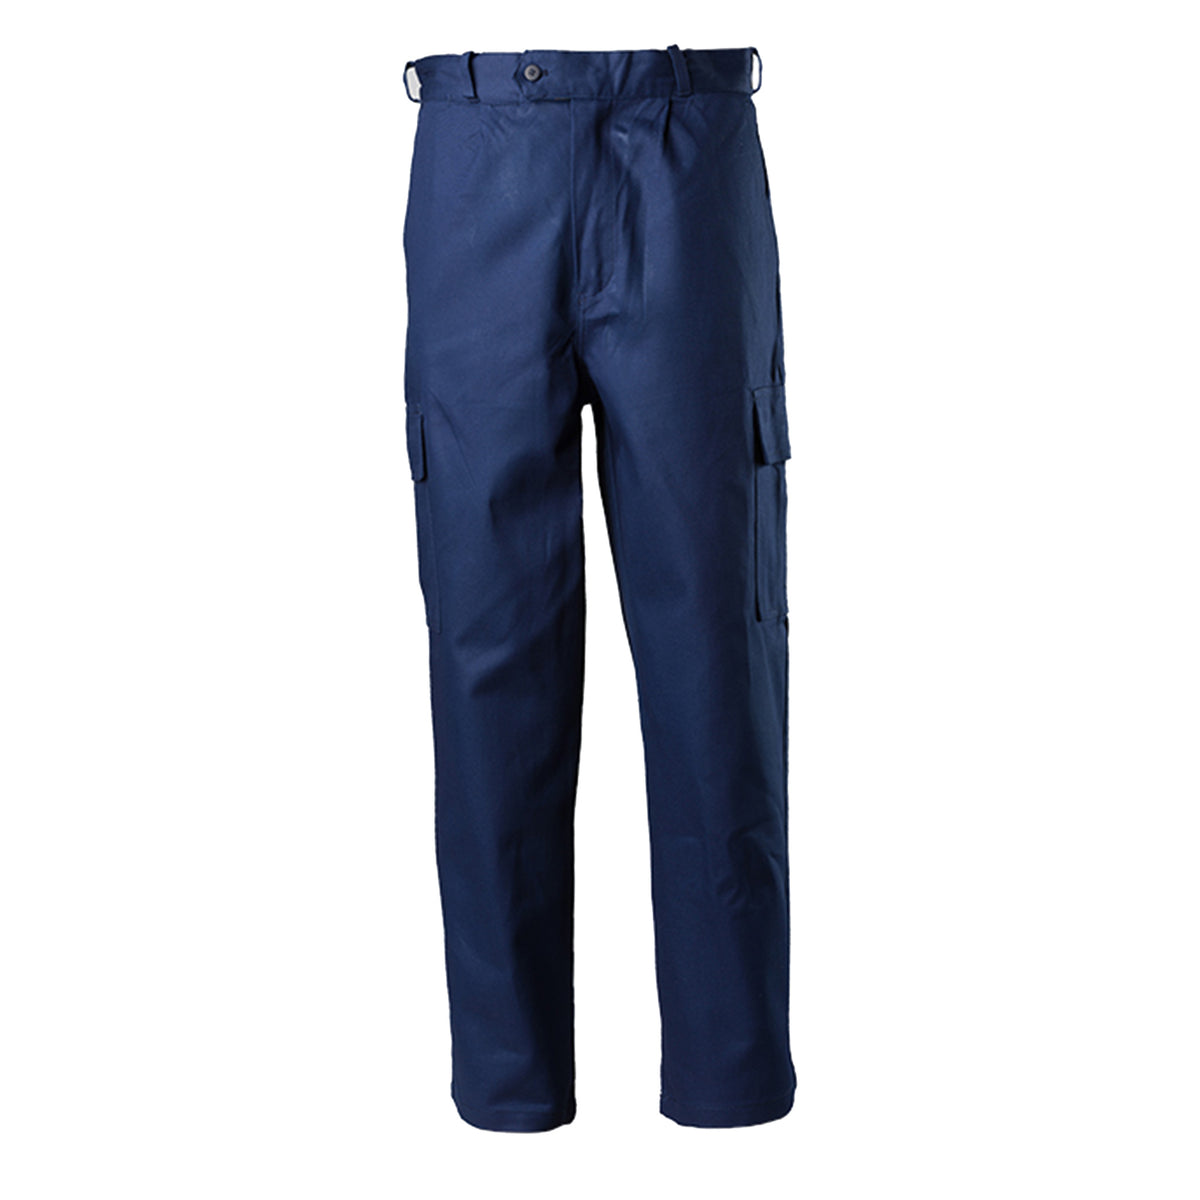 navy heavy weight cotton cargo pant